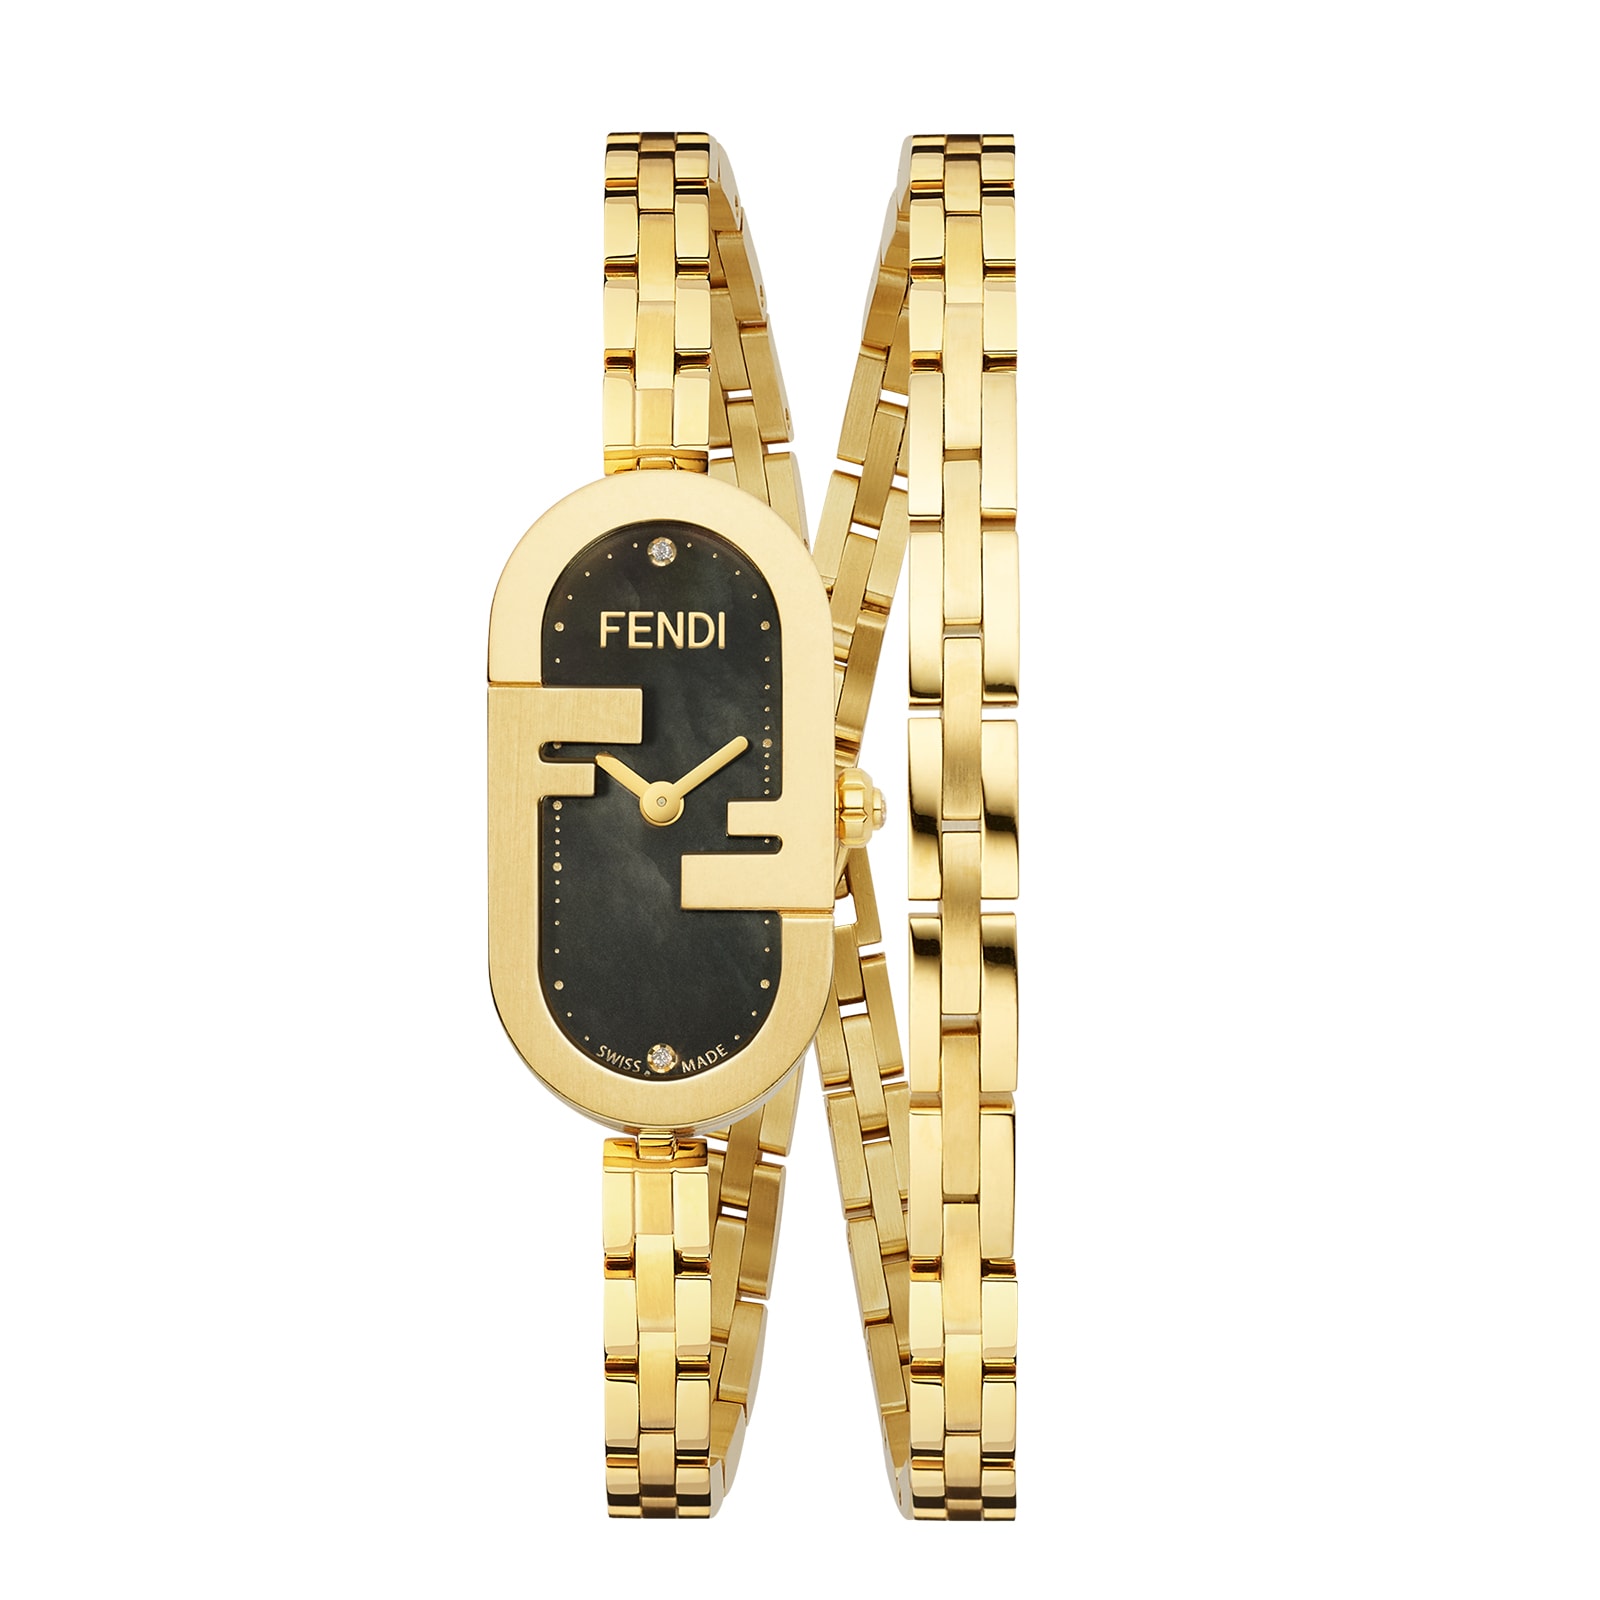 O’Lock Vertical 14.8mm X 28.3mm Oval Watch with FF Logo